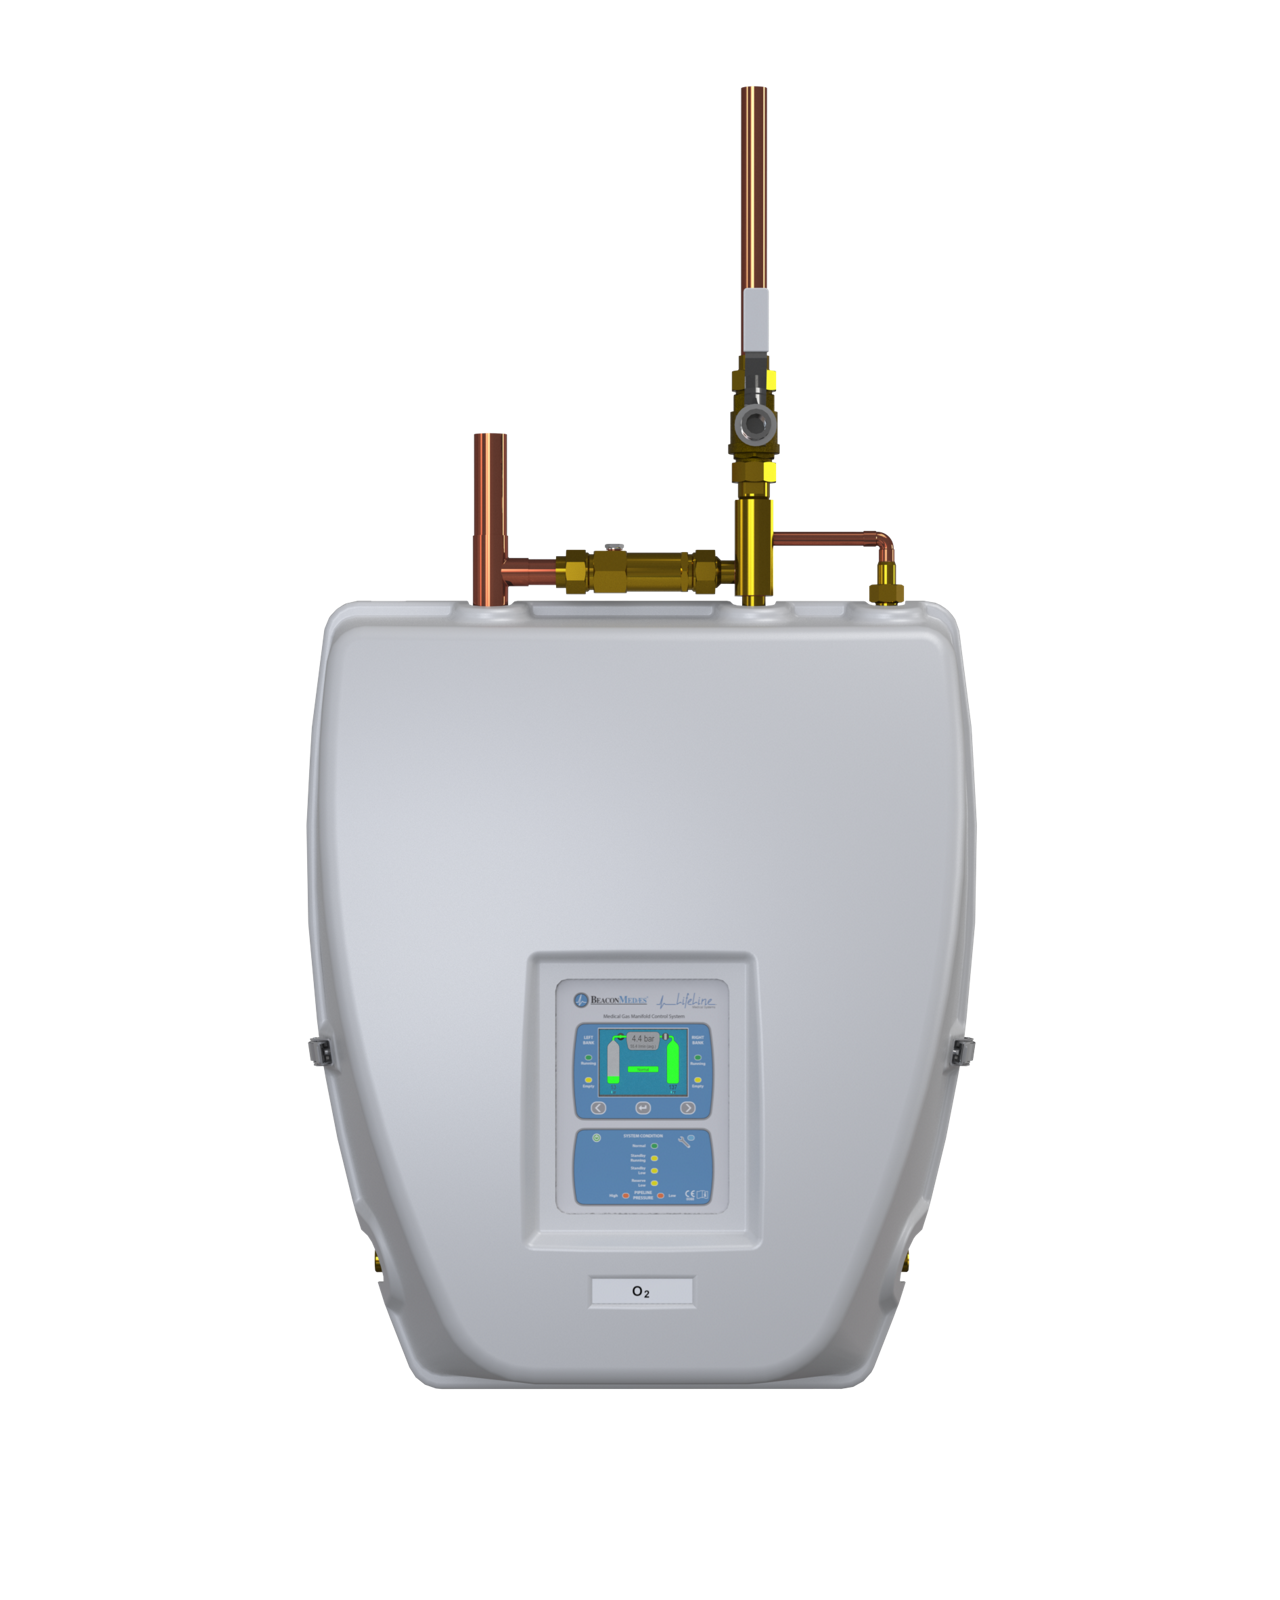 Suppliers of Reliable Medical Gas Supply Systems UK